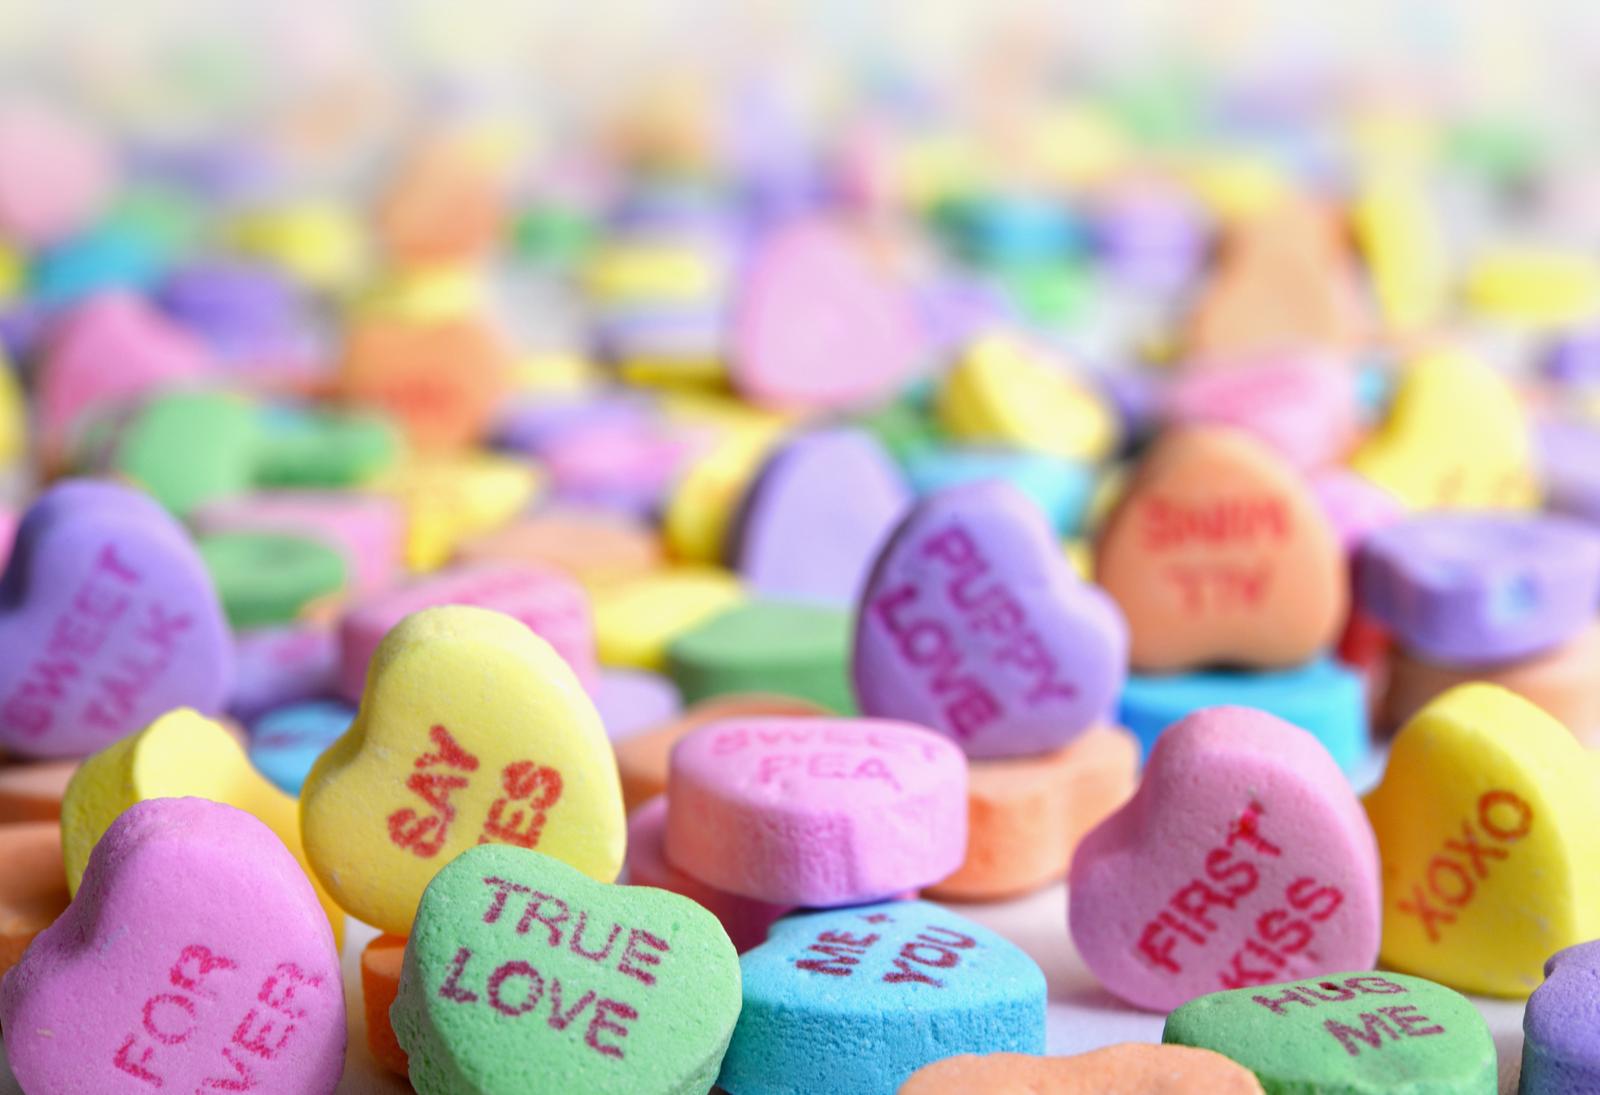 What Valentine Are You? Valentine's Day candy hearts